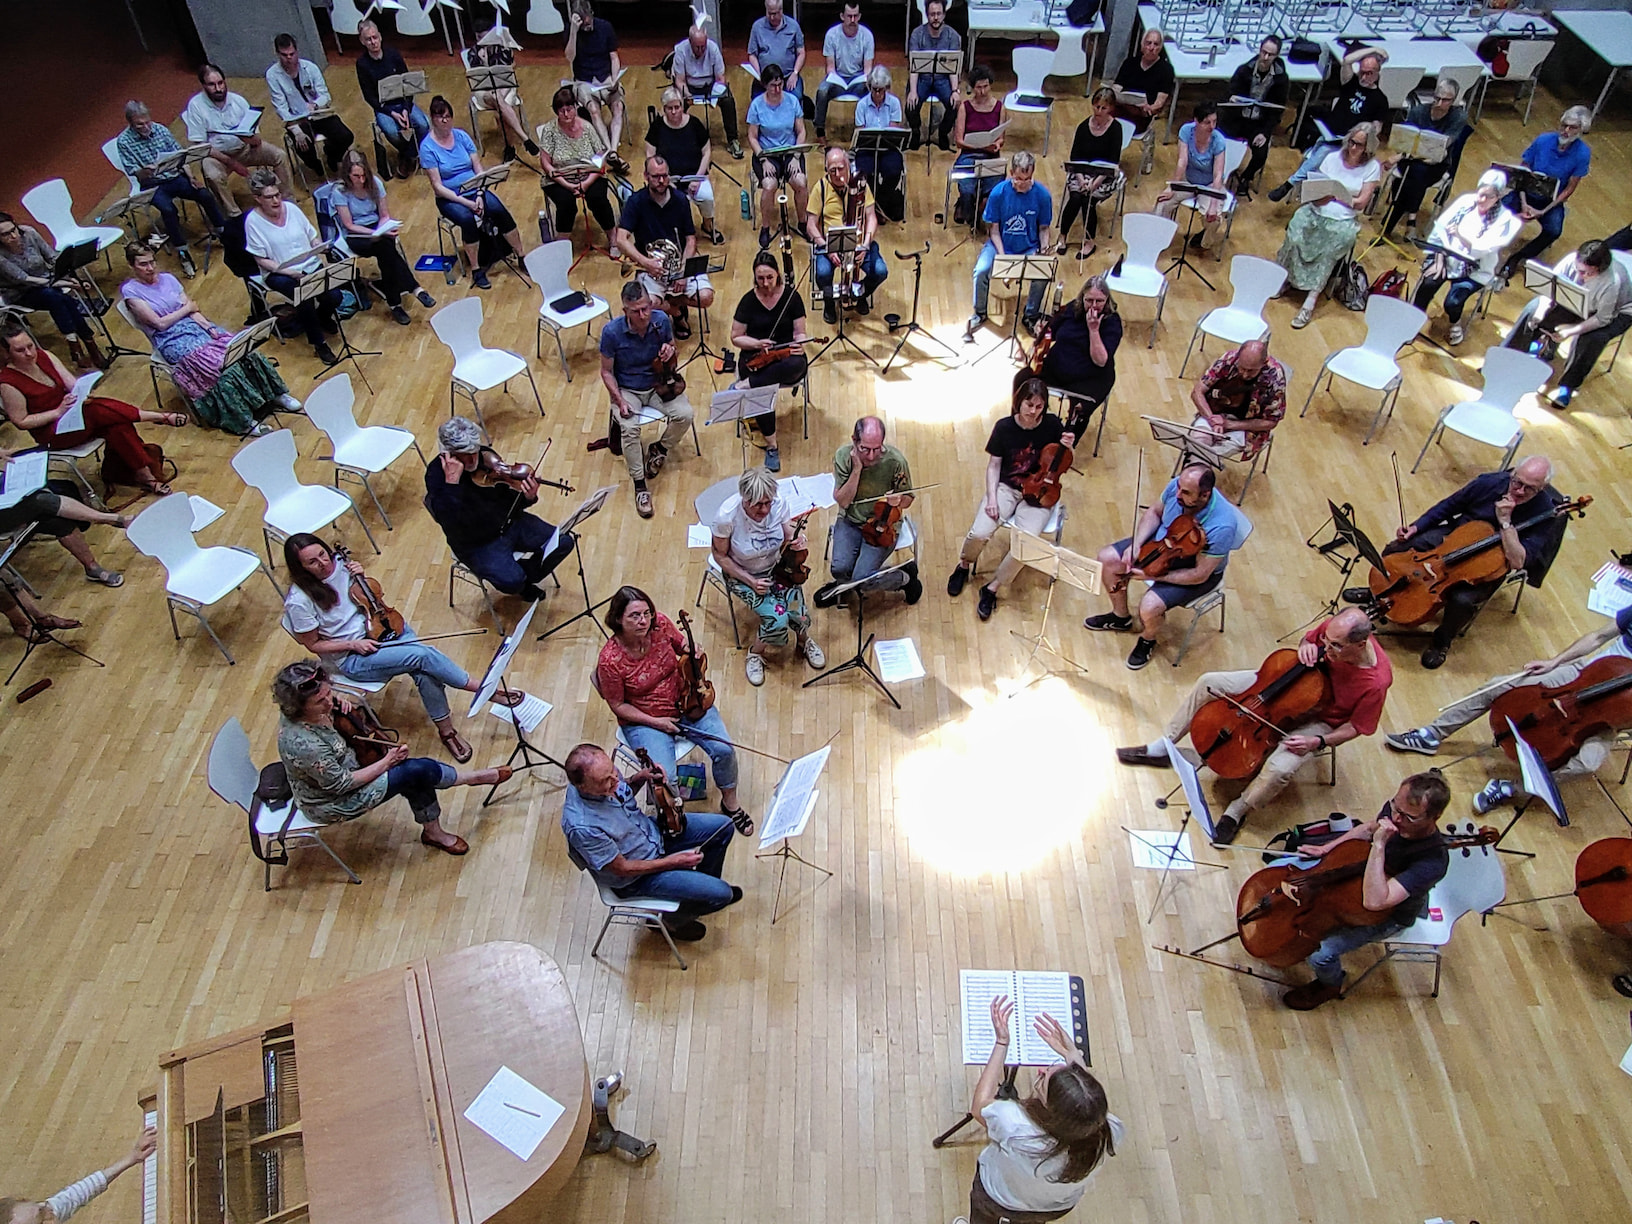 a group of people sitting in chairs and playing instruments